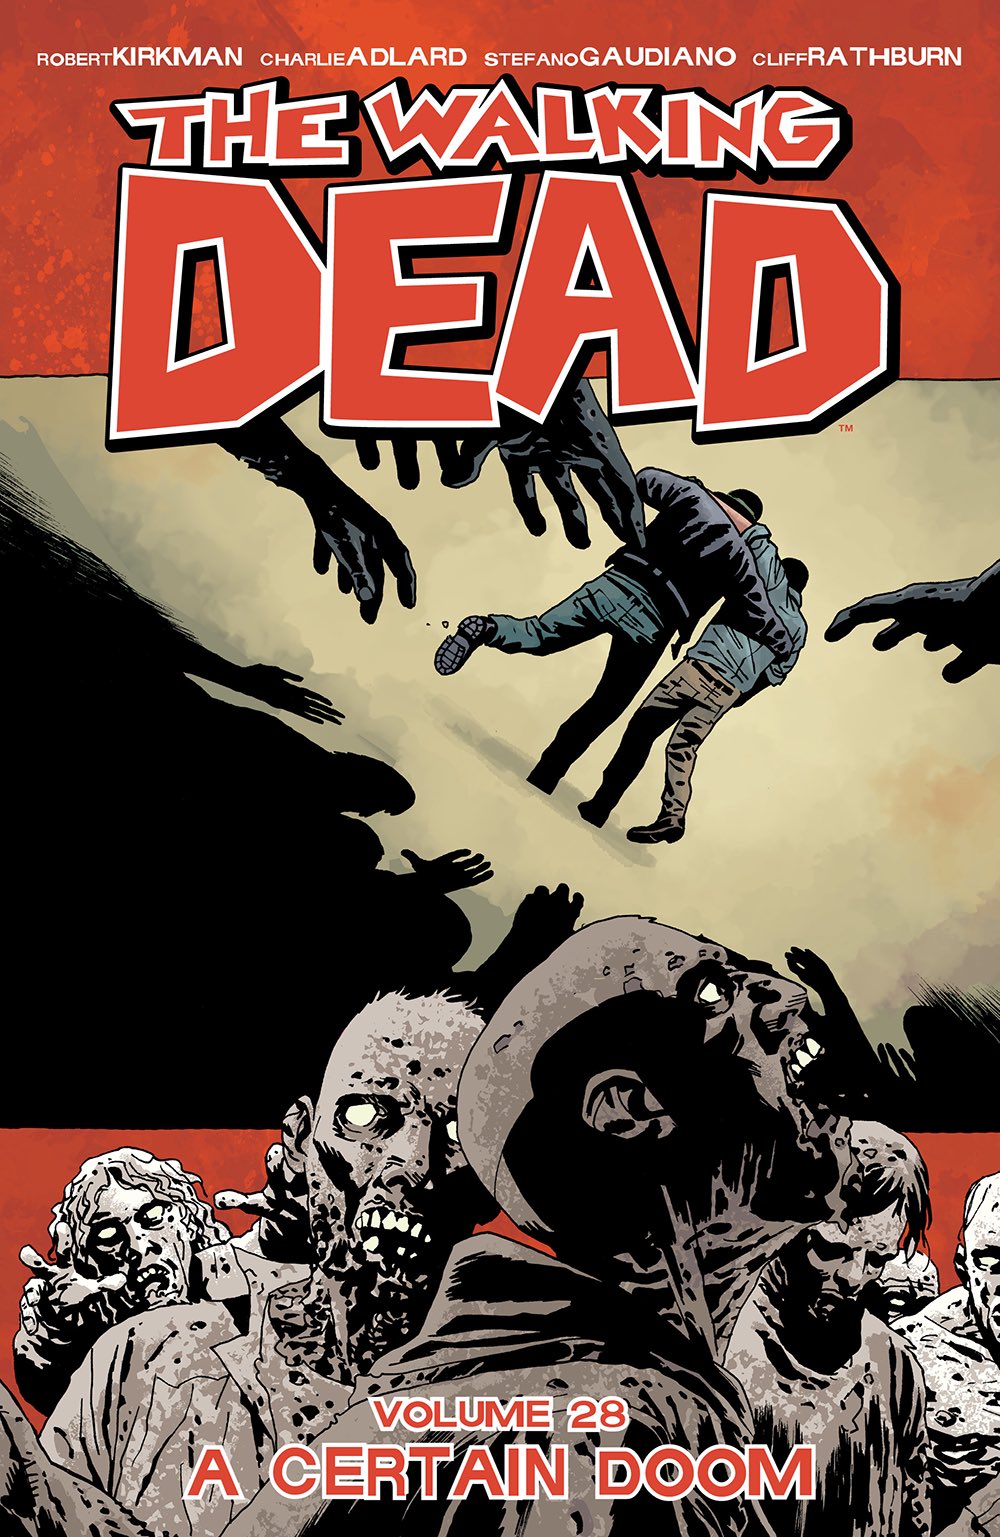 The cover of Walking Dead Volume 28, out in September